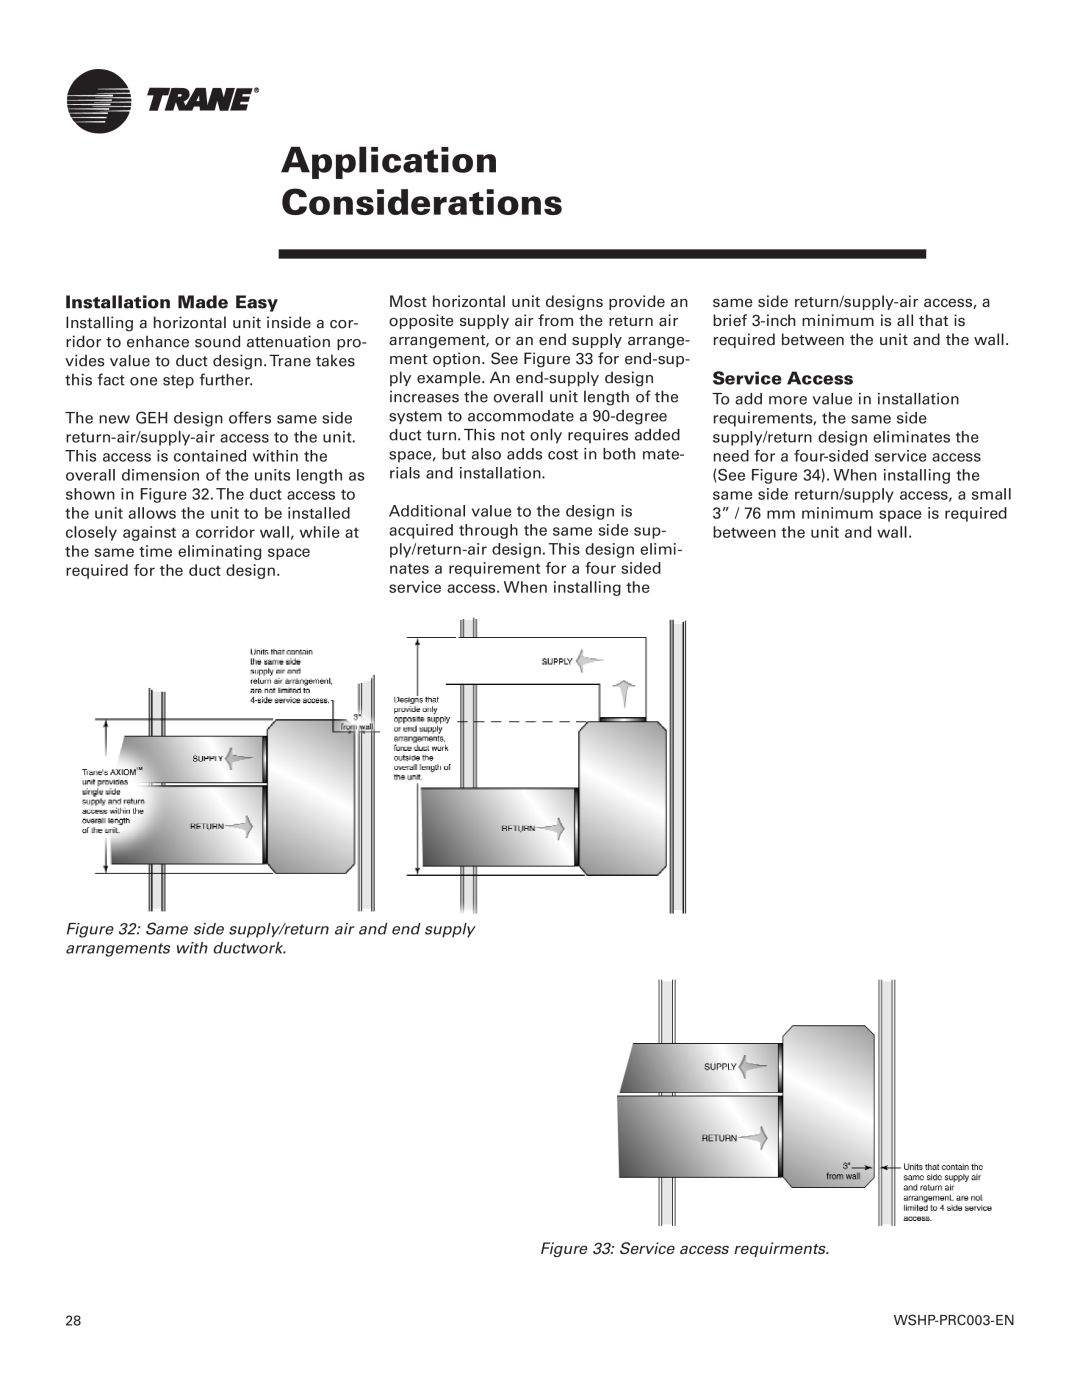 Trane 120 GEH manual Application Considerations, Installation Made Easy, Service Access, Service access requirments 